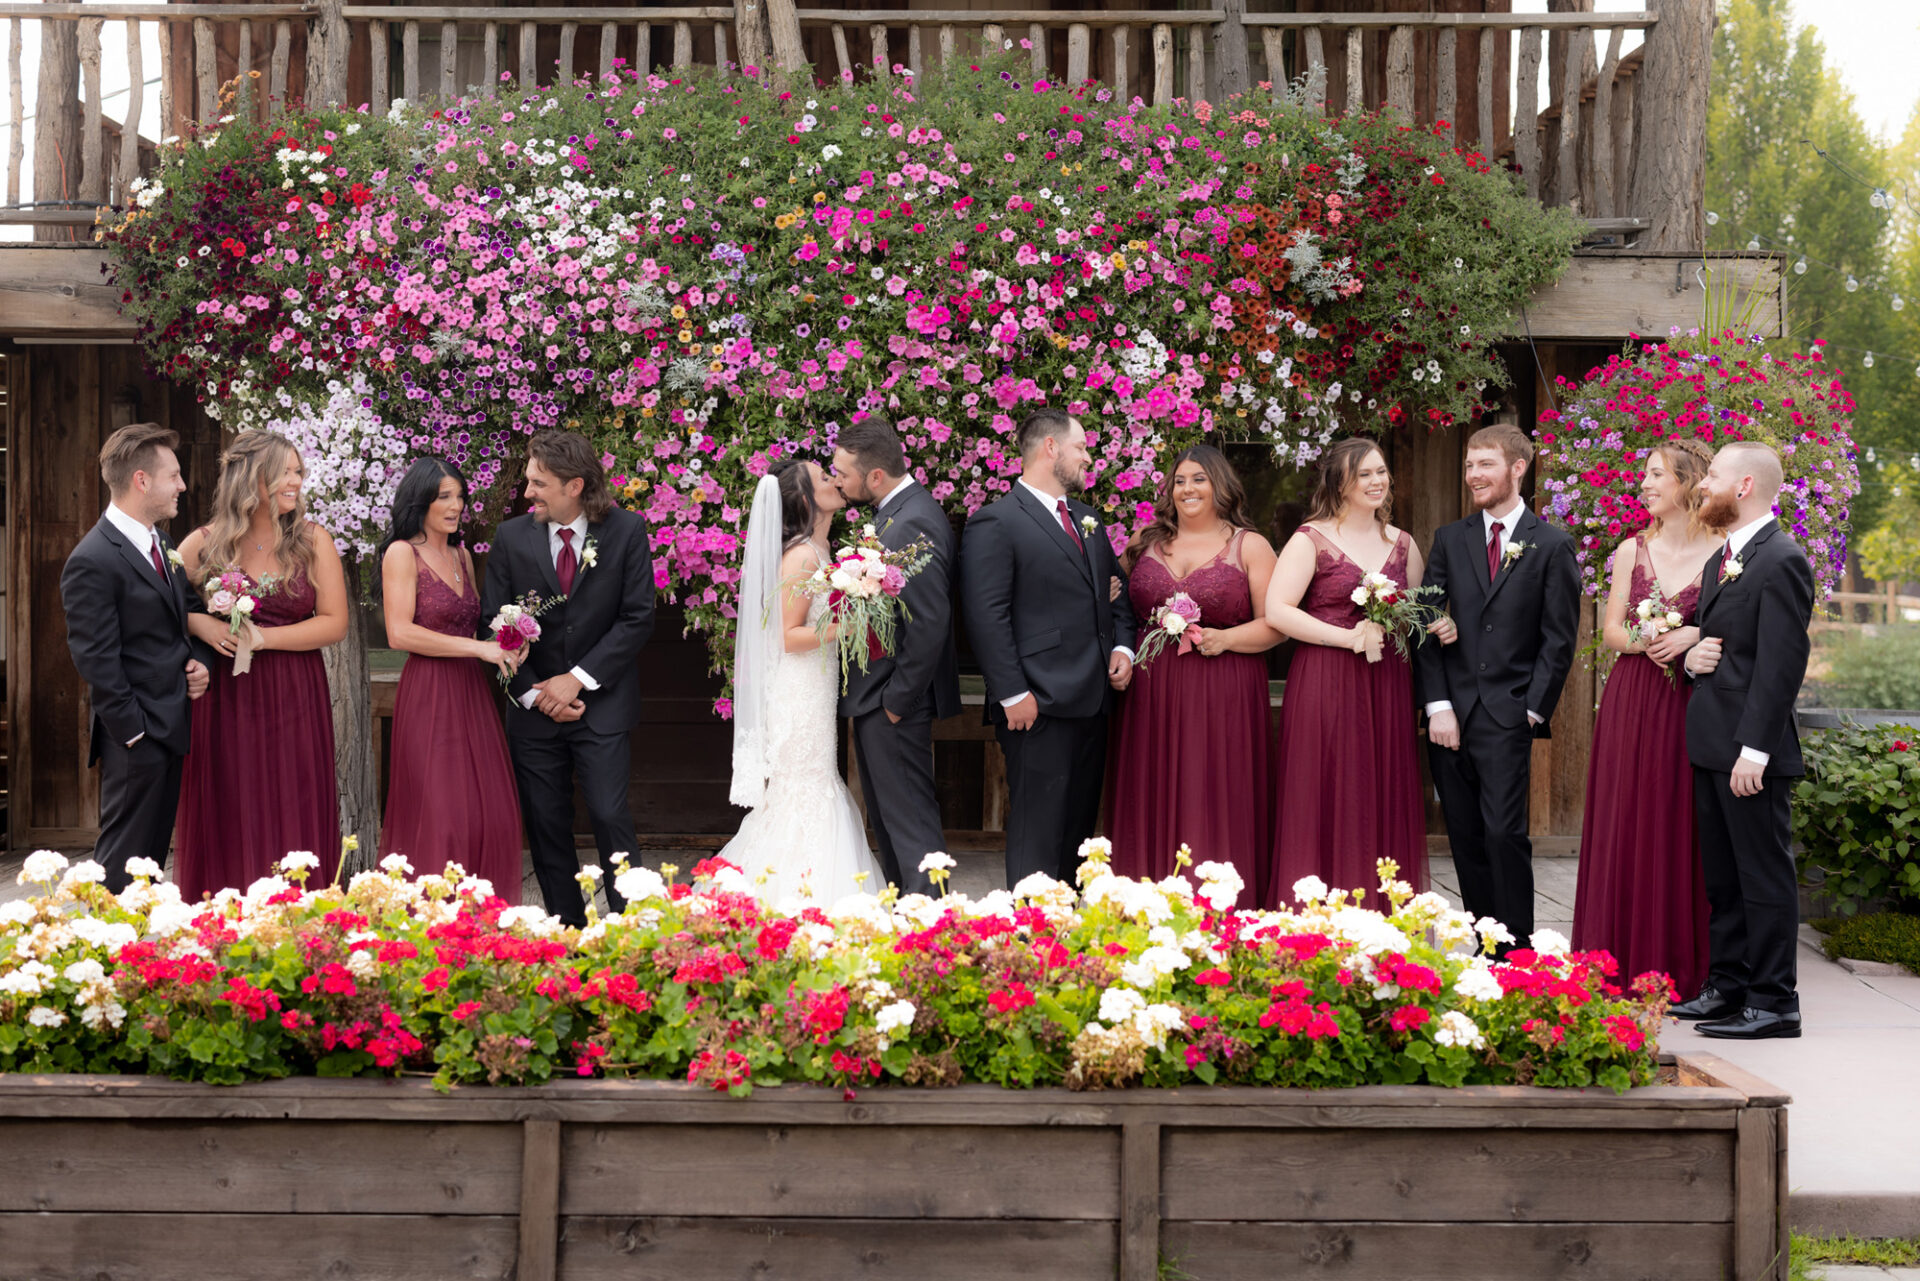 The newlyweds with their bridesmaids and groomsmen